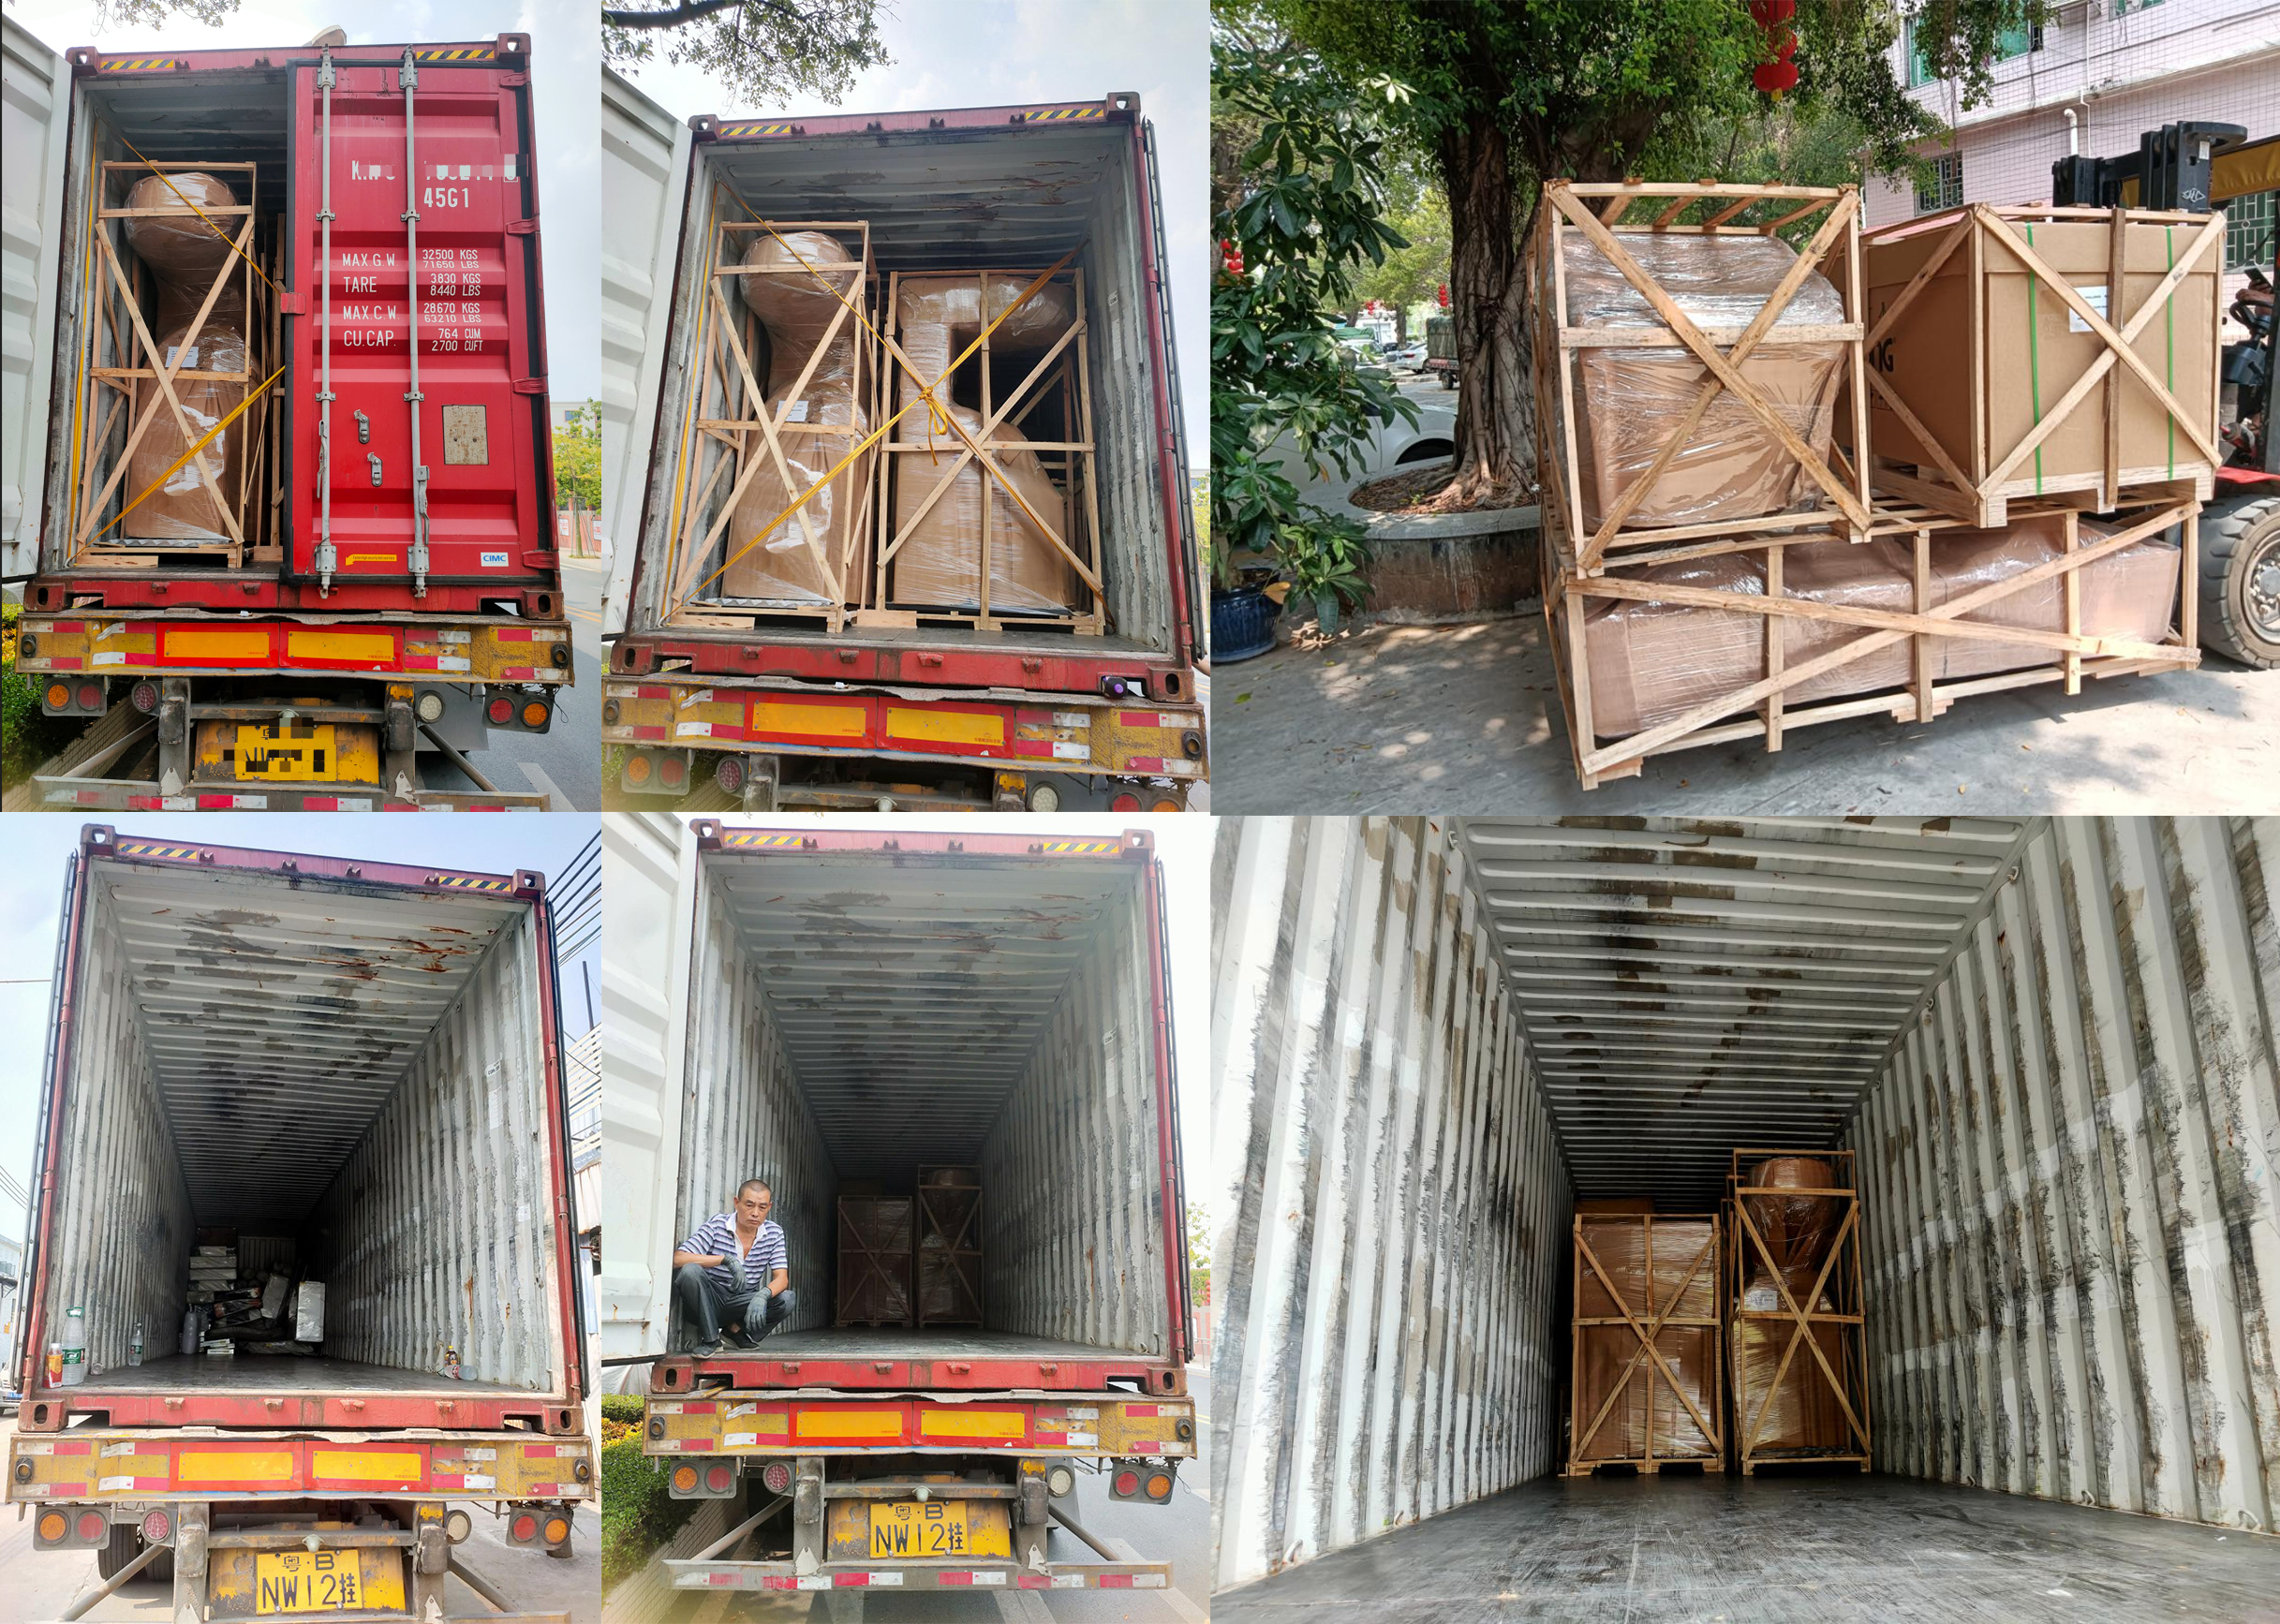 The 4th Order Of Our Customer From Saudi Arabia Just Loaded the Container !